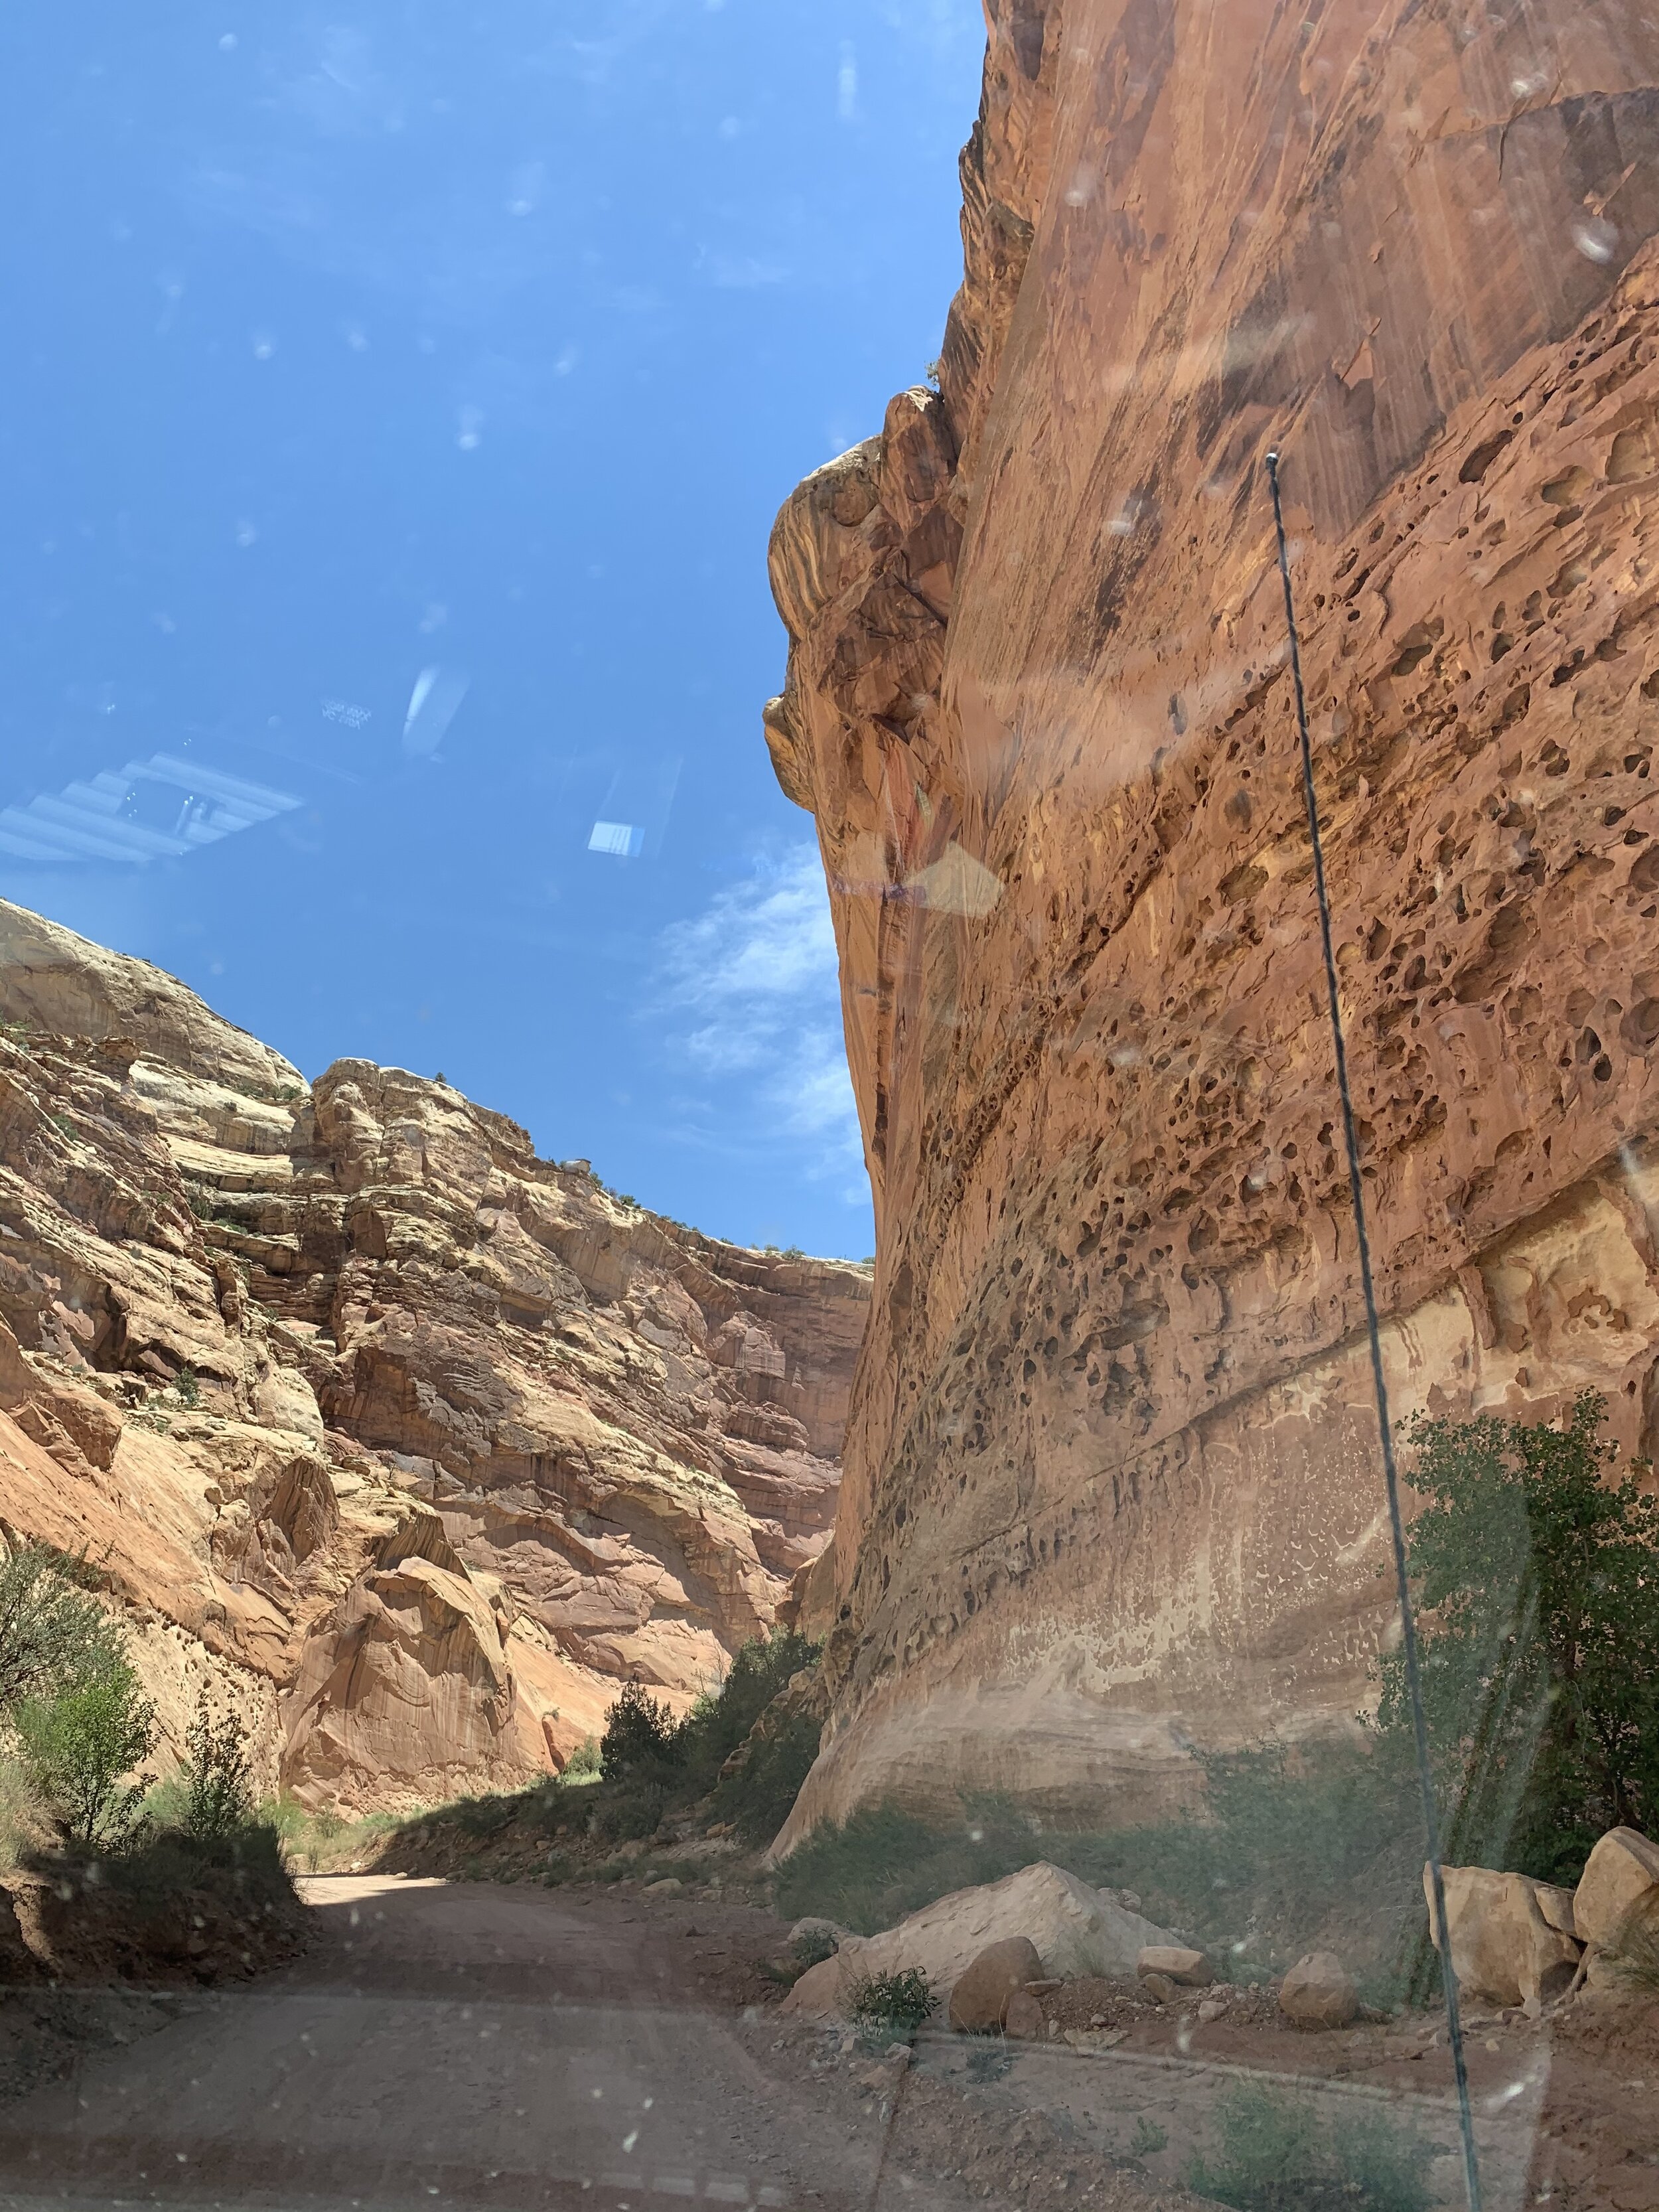    Capitol Reef is known to have monsoons. There are warning signs everywhere not to enter these areas if there is a threat of rain. The abundant rocks cause the water not to be easily absorbed into the ground, and the force of the water can knock th